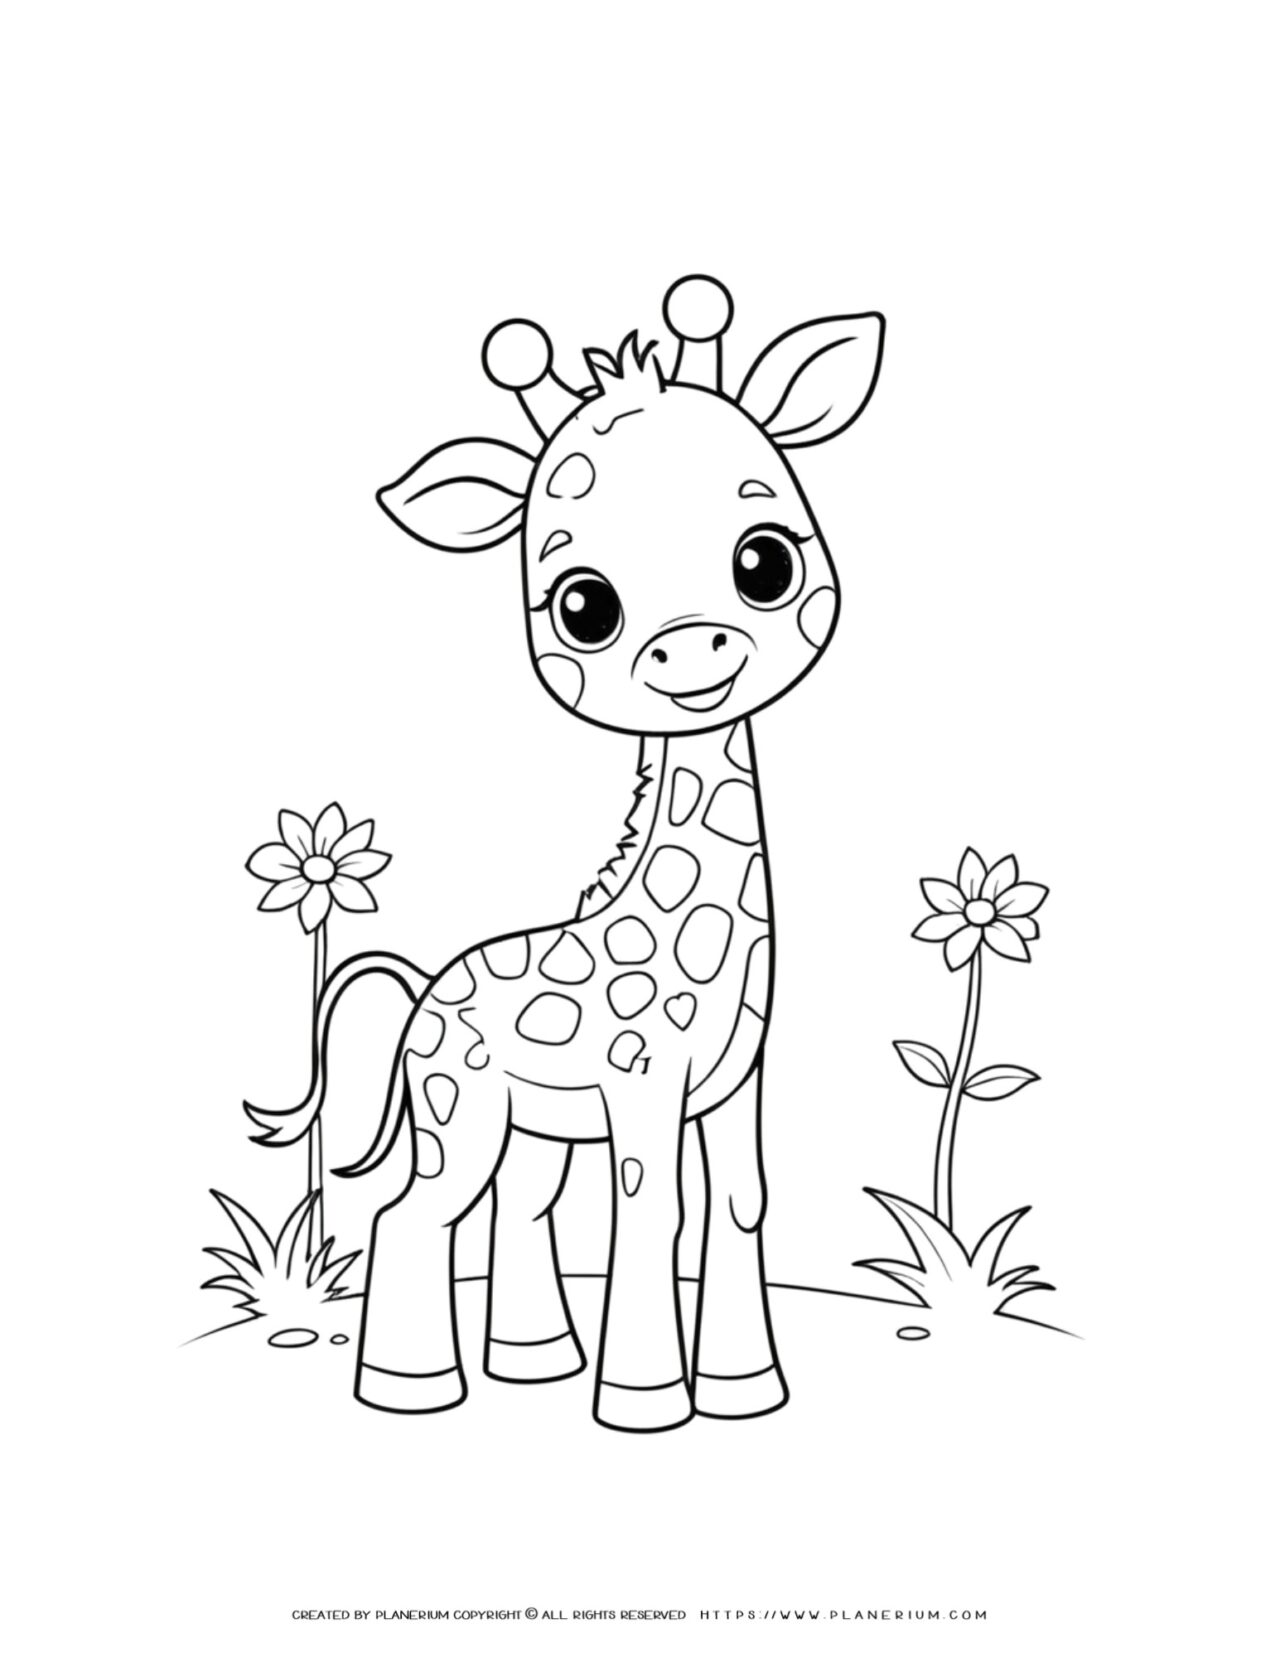 cute-happy-giraffe-with-flowers-coloring-page-for-kids